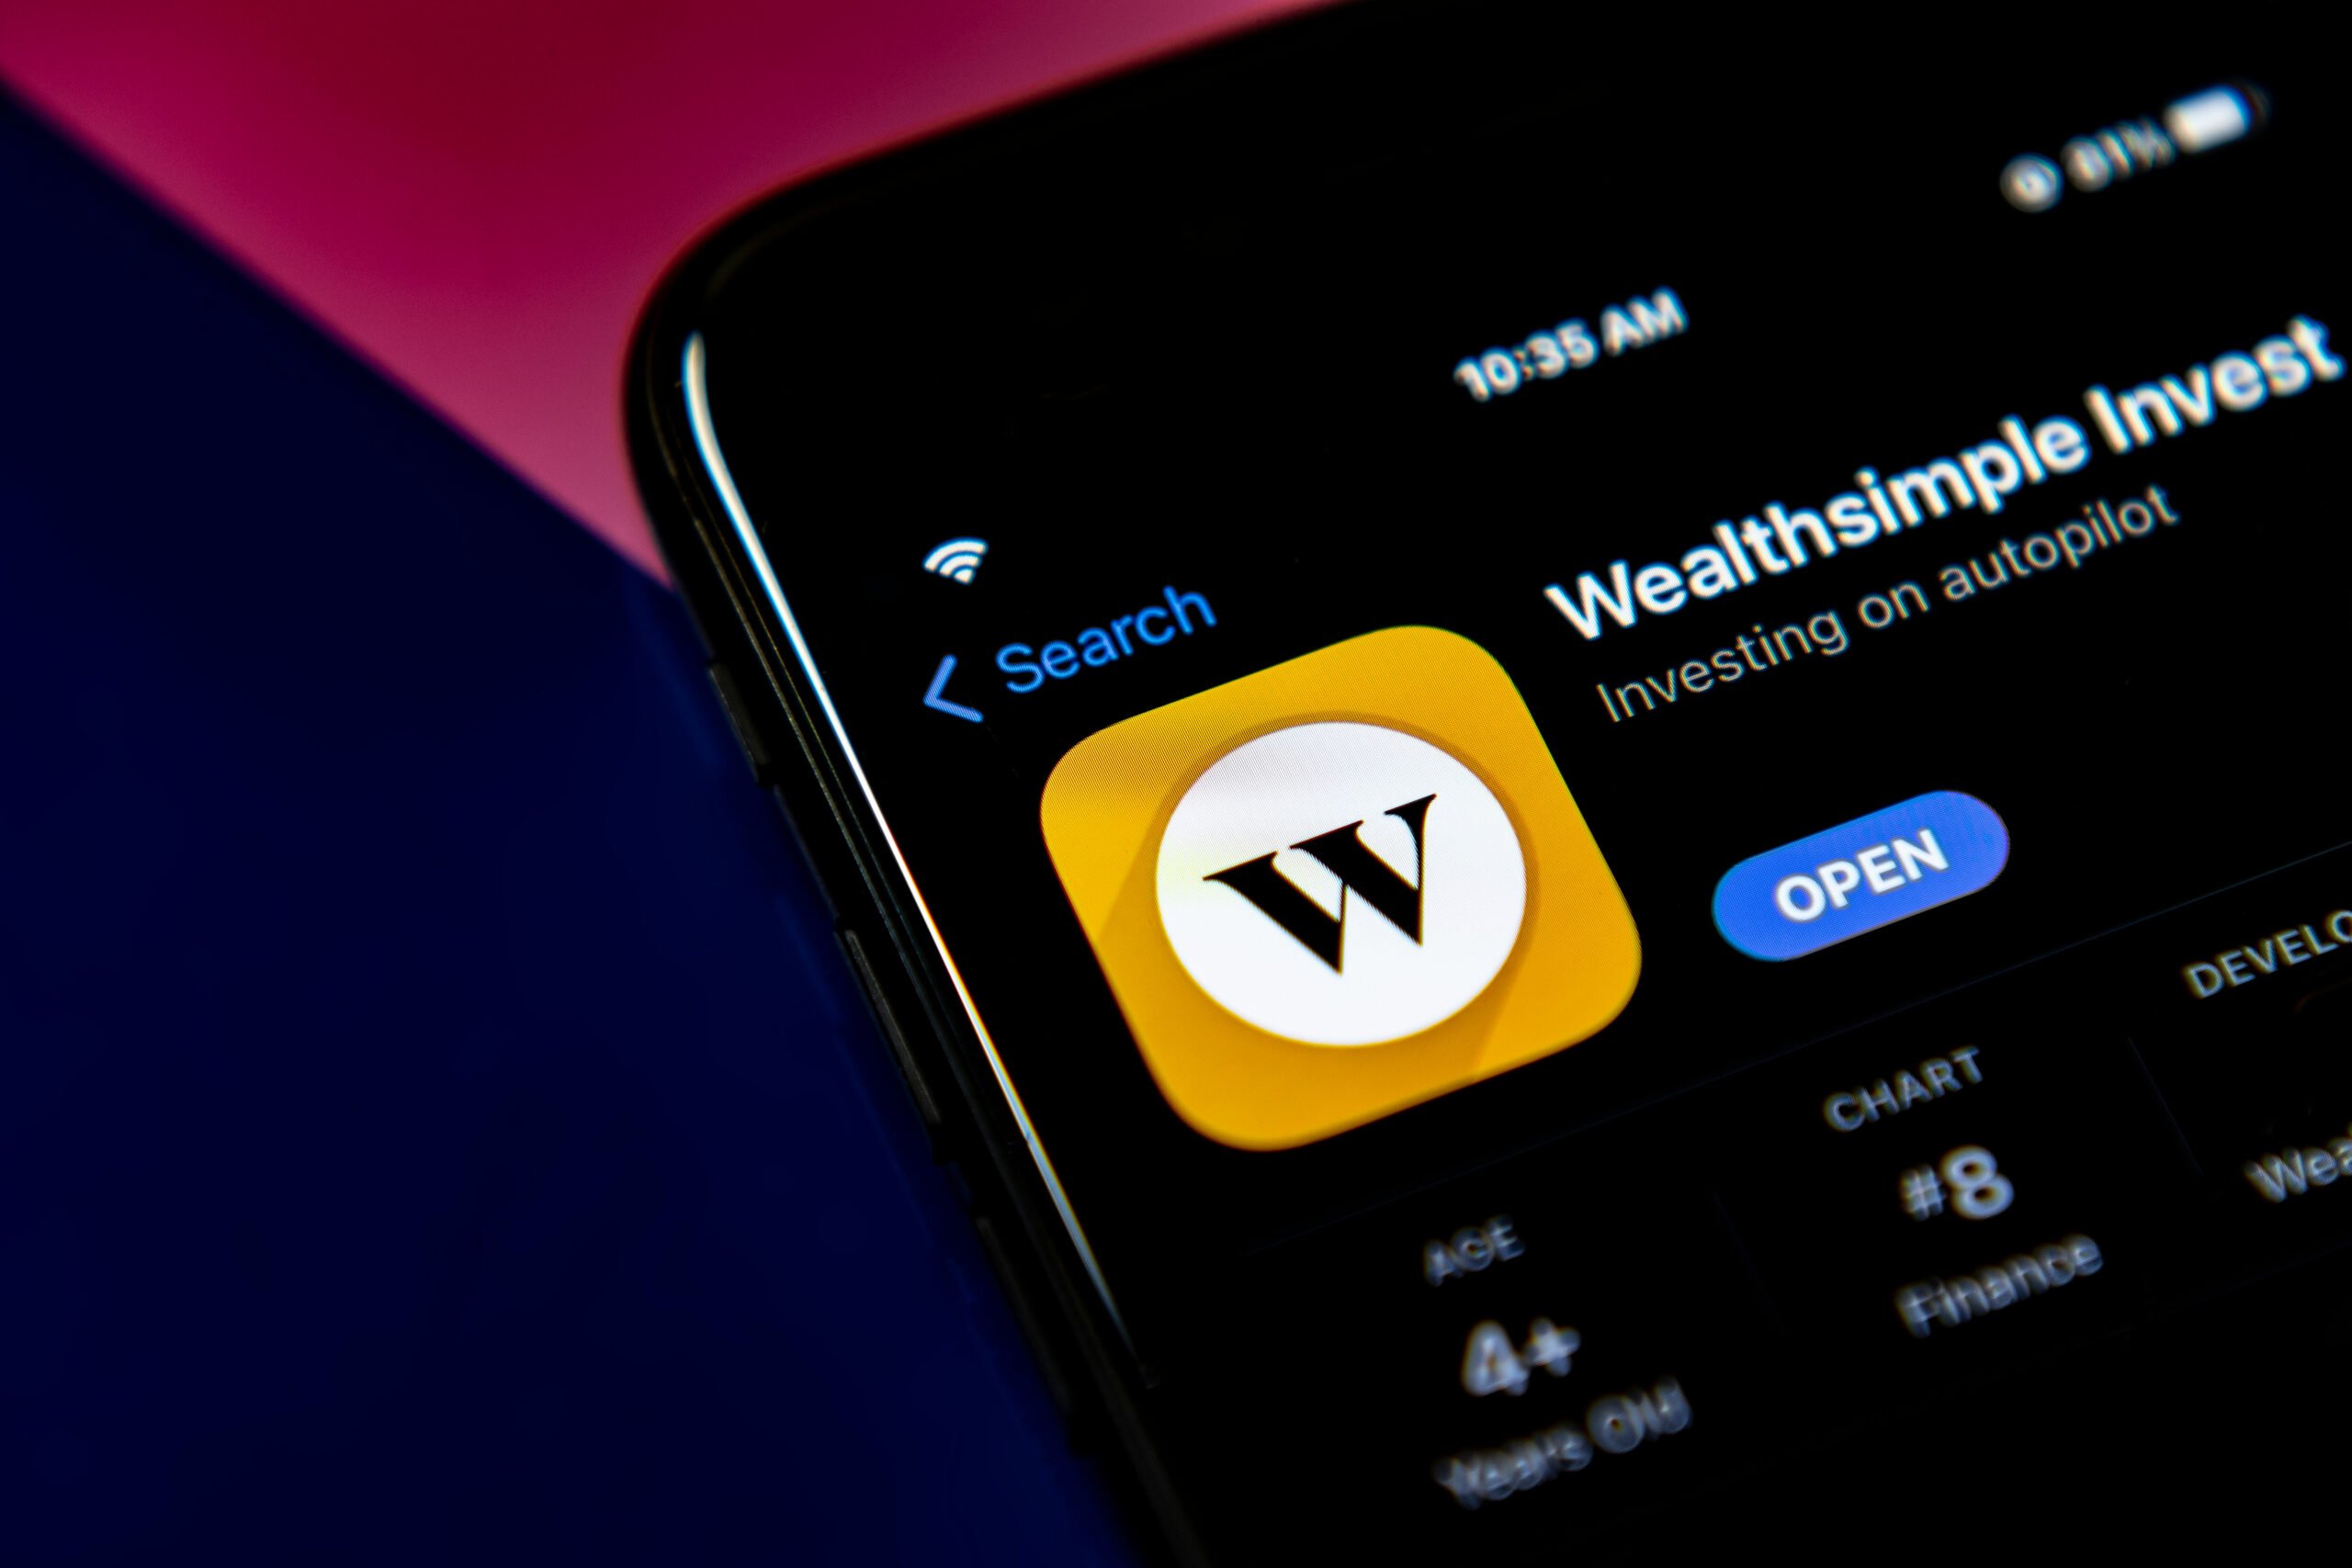 Which Investment Platform is Right for Me? Wealthsimple or Interactive Brokers?